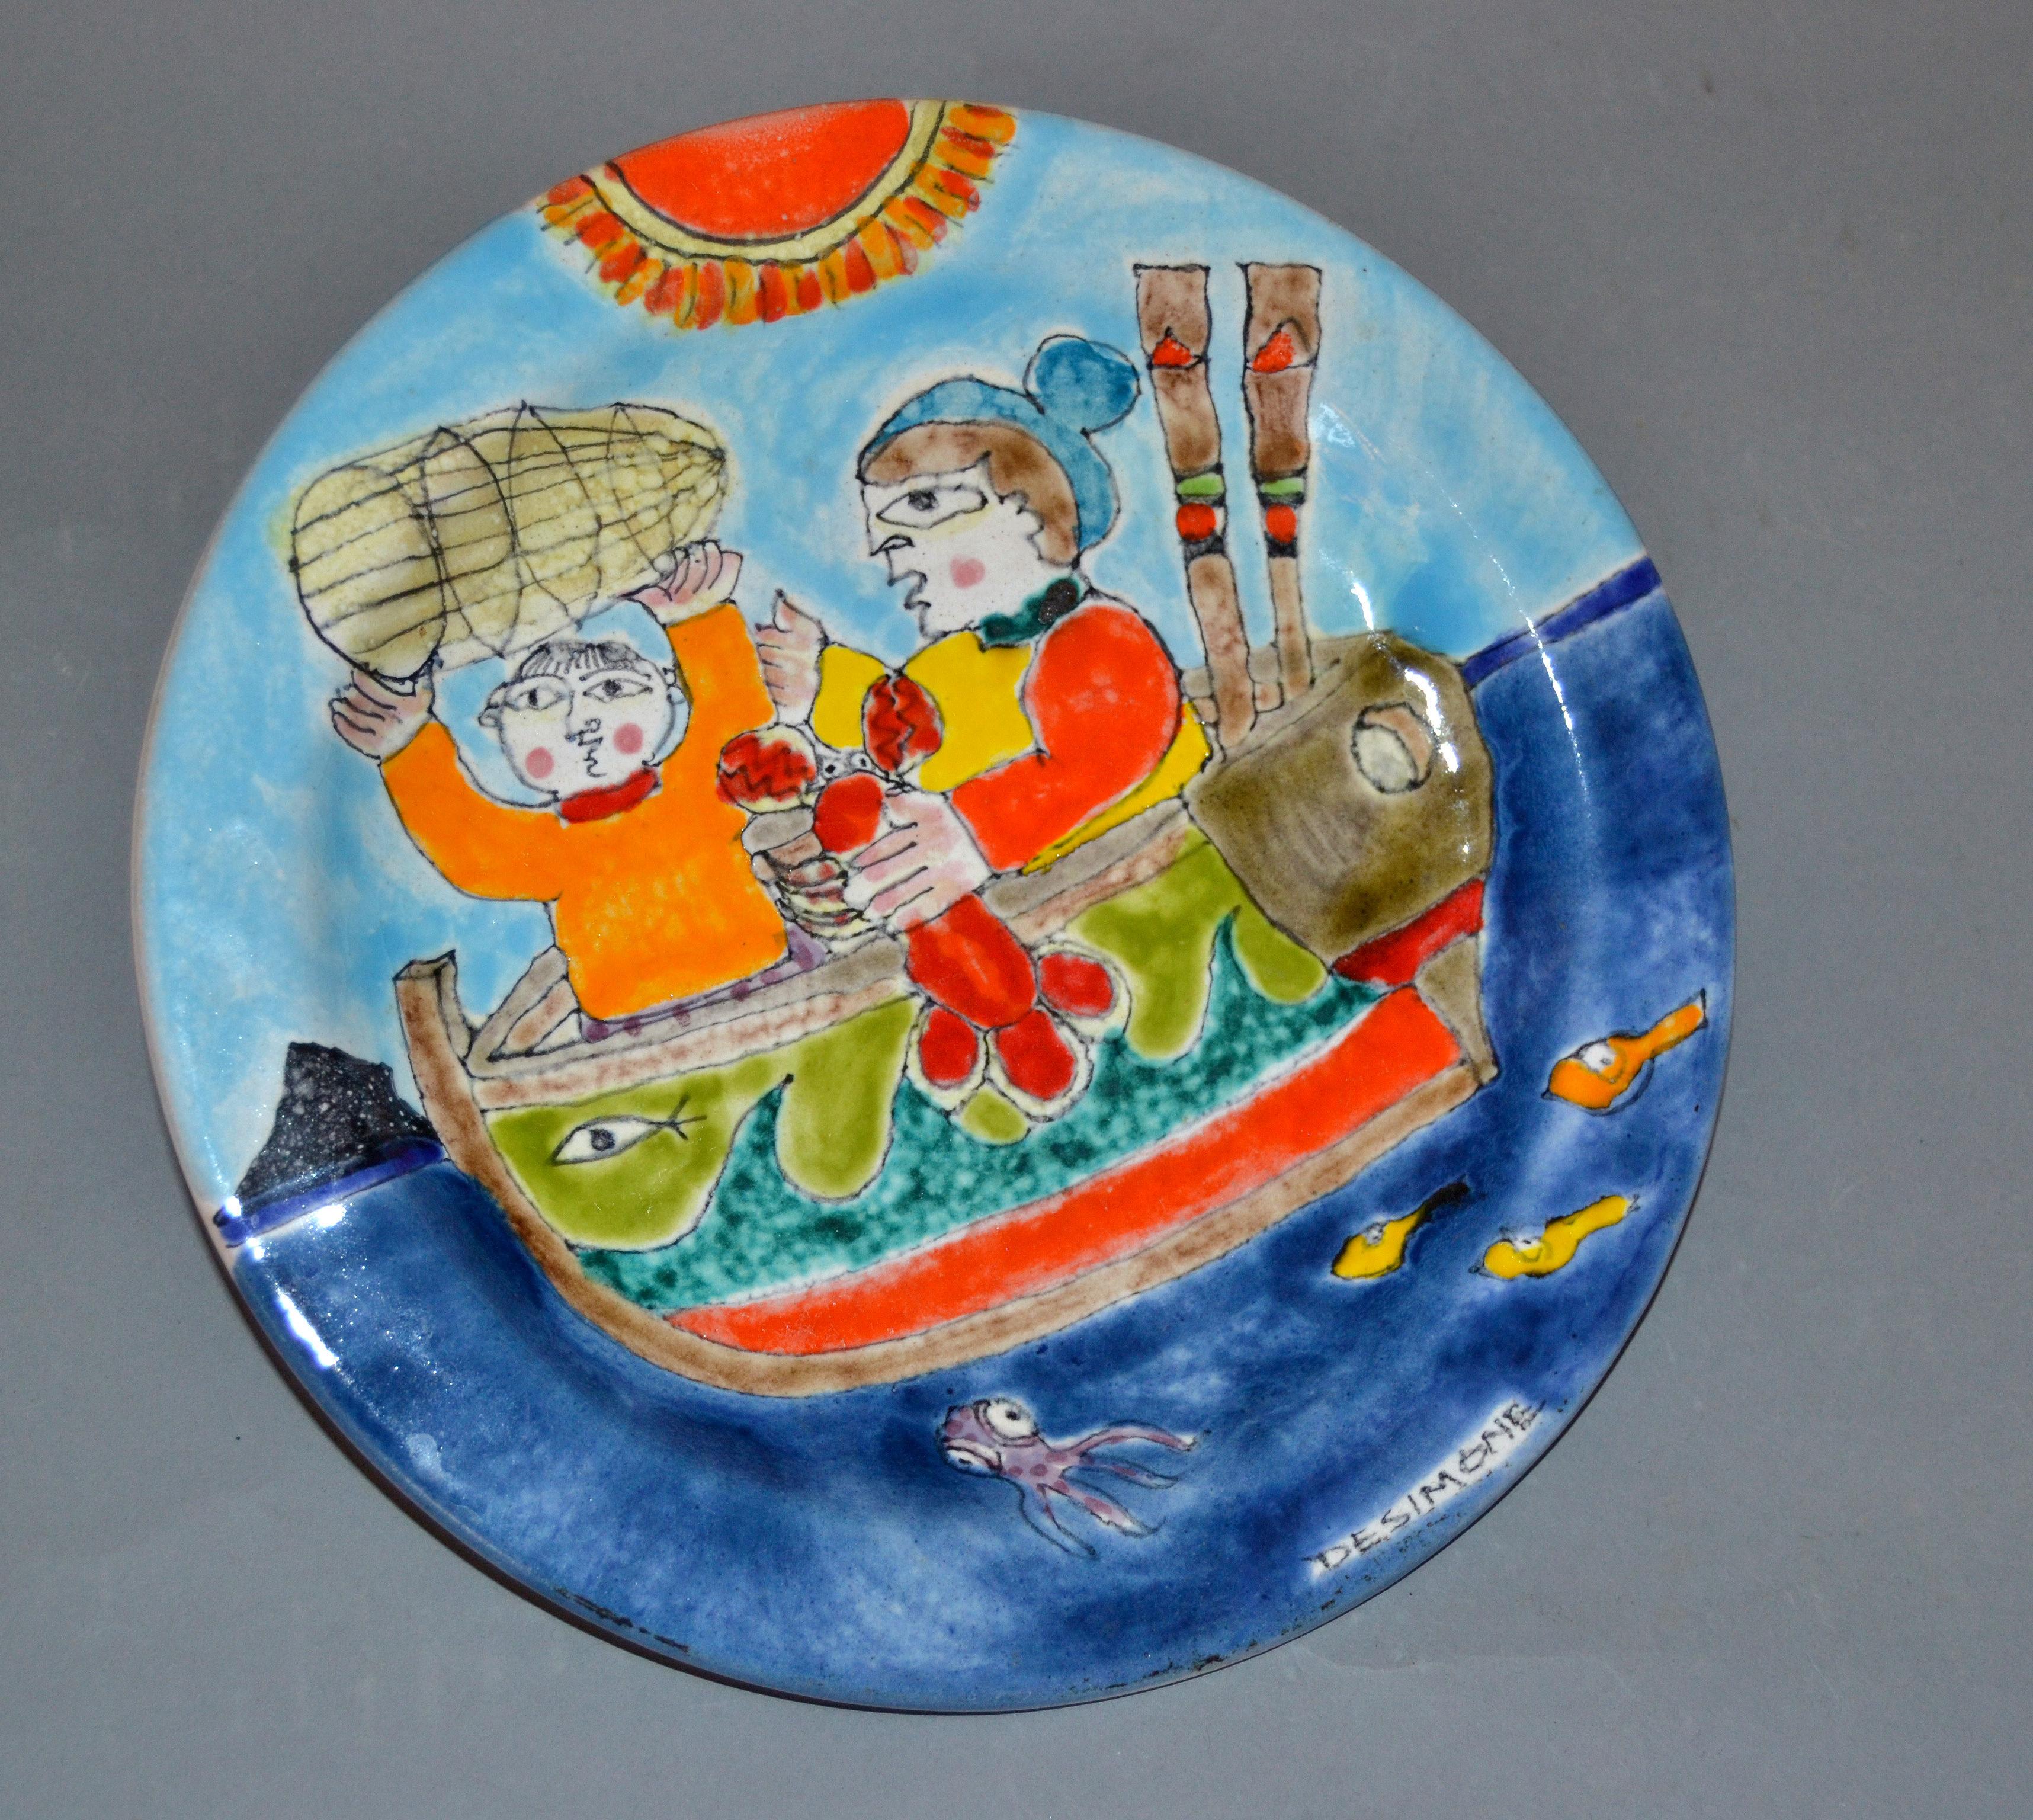 Original Italian Giovanni Desimone hand painted art pottery, round decor plate depicts a scene of fishermen lobster fishing with basket and octopus on a sunny day.
The plate is glazed and very colorful.
Makers Mark on the plate as well as marked